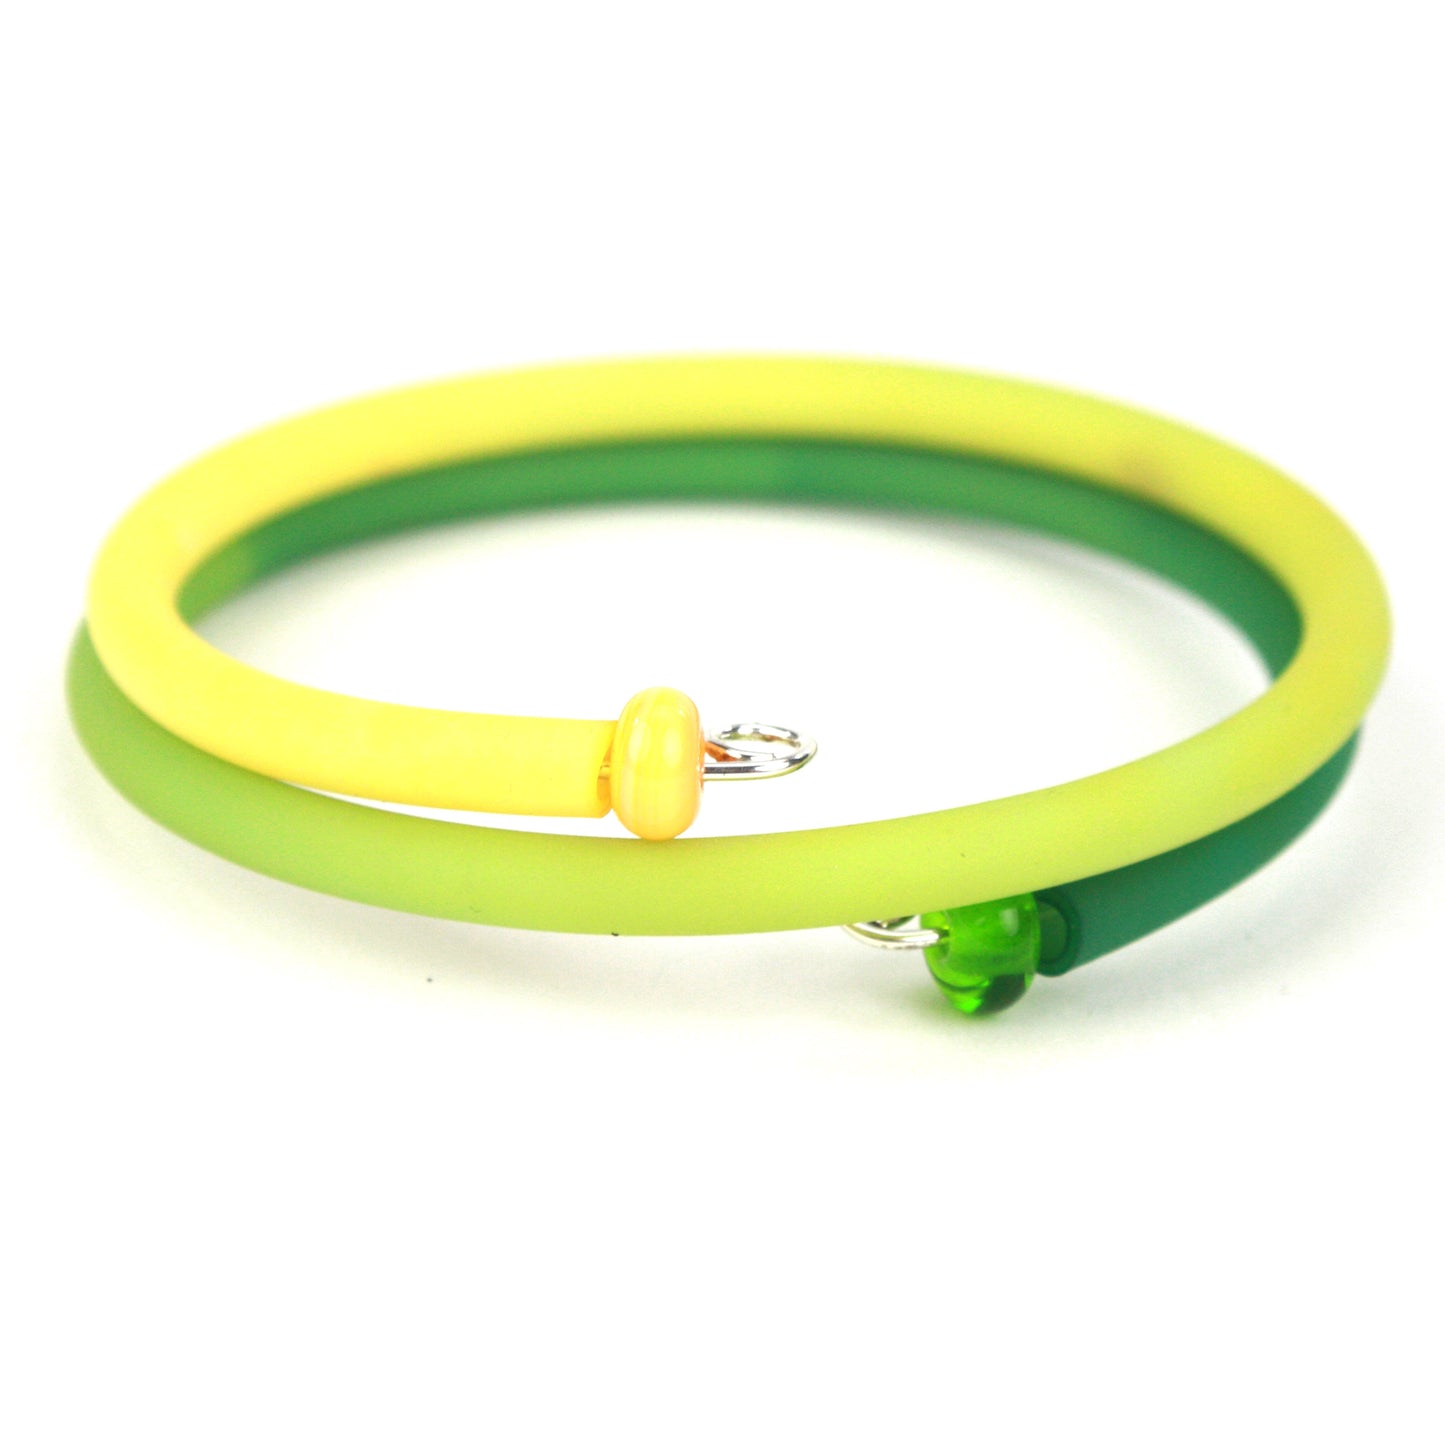 Double wrap bracelet - Yellow and green